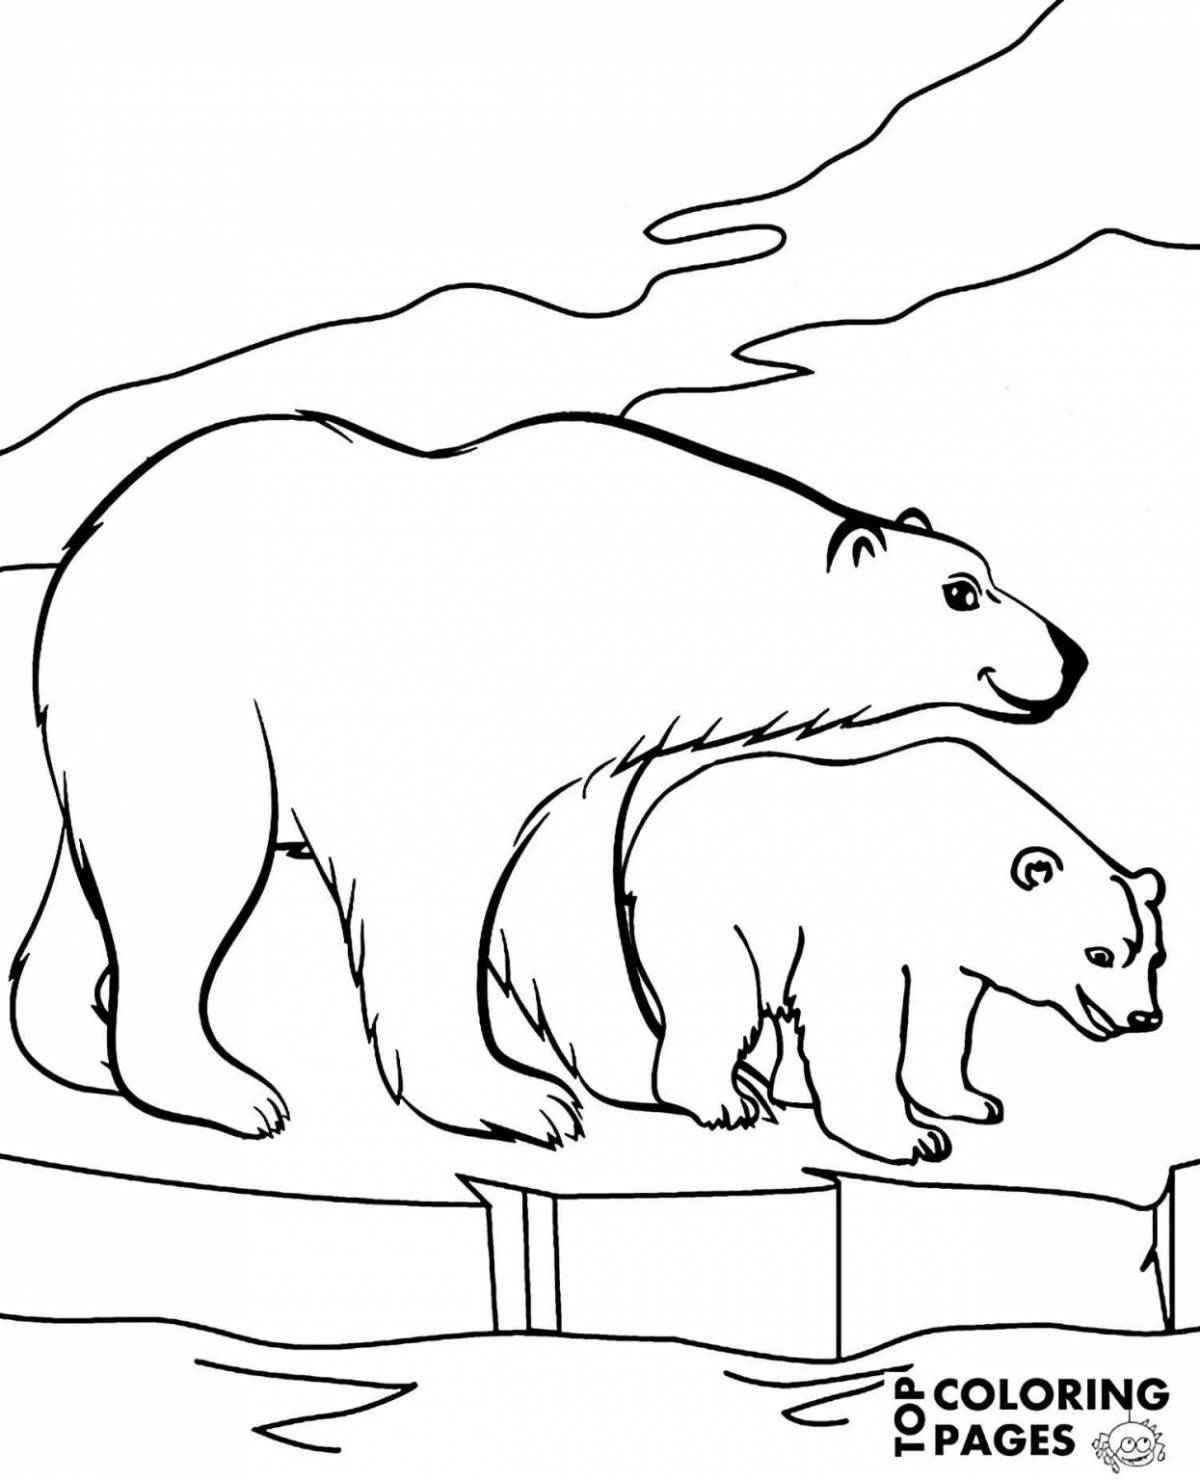 Exquisite polar bear coloring book for kids